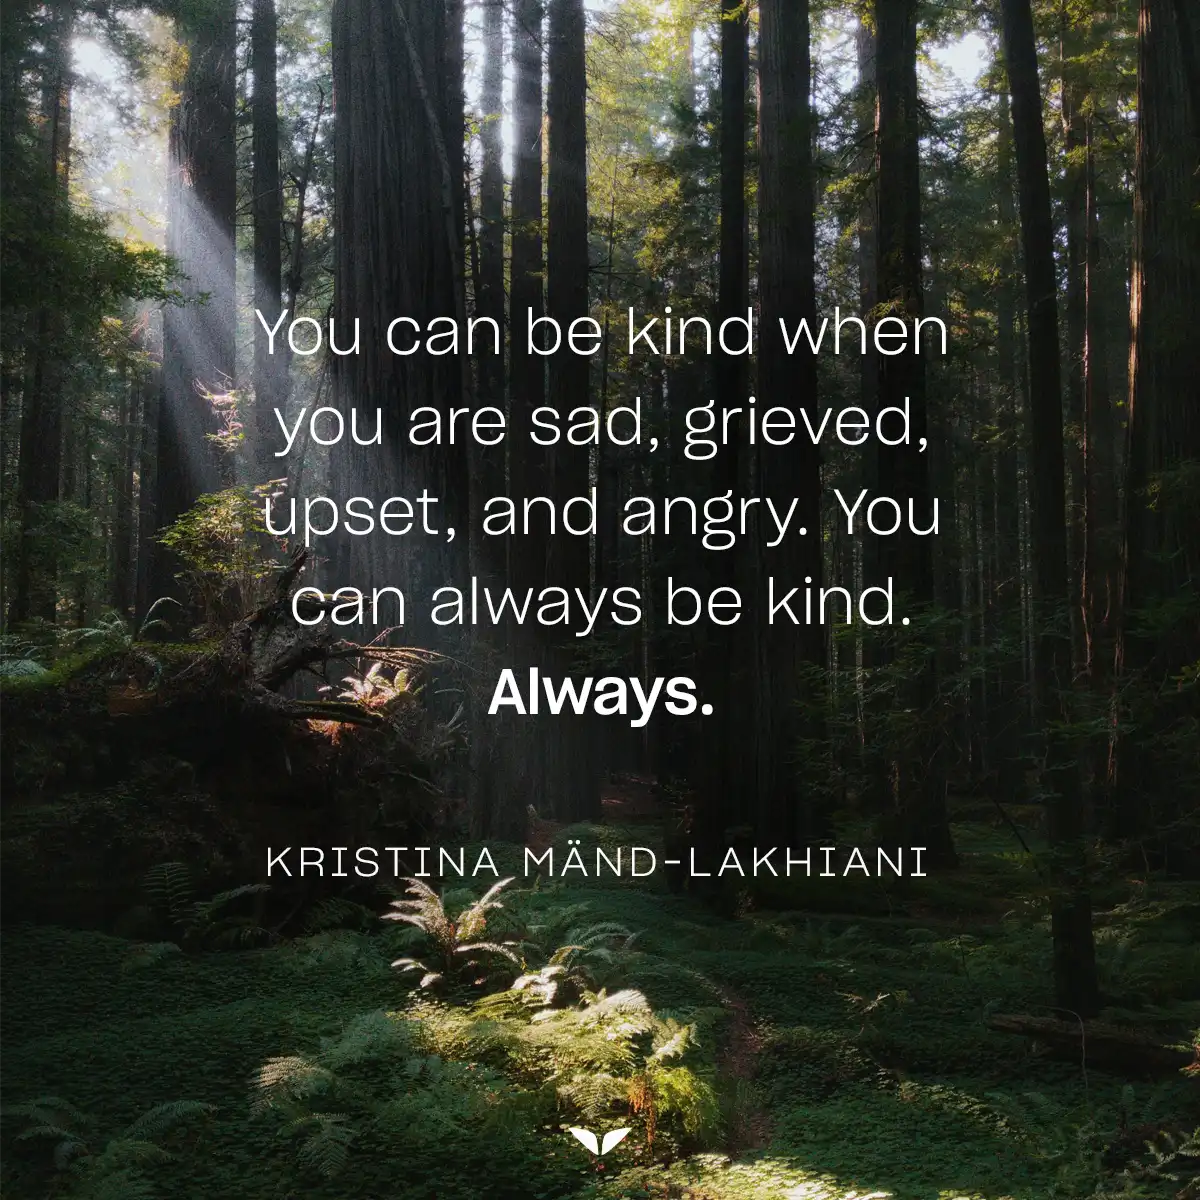 One the many perfectly imperfect quotes about kindness by Kristina Mänd-Lakhiani